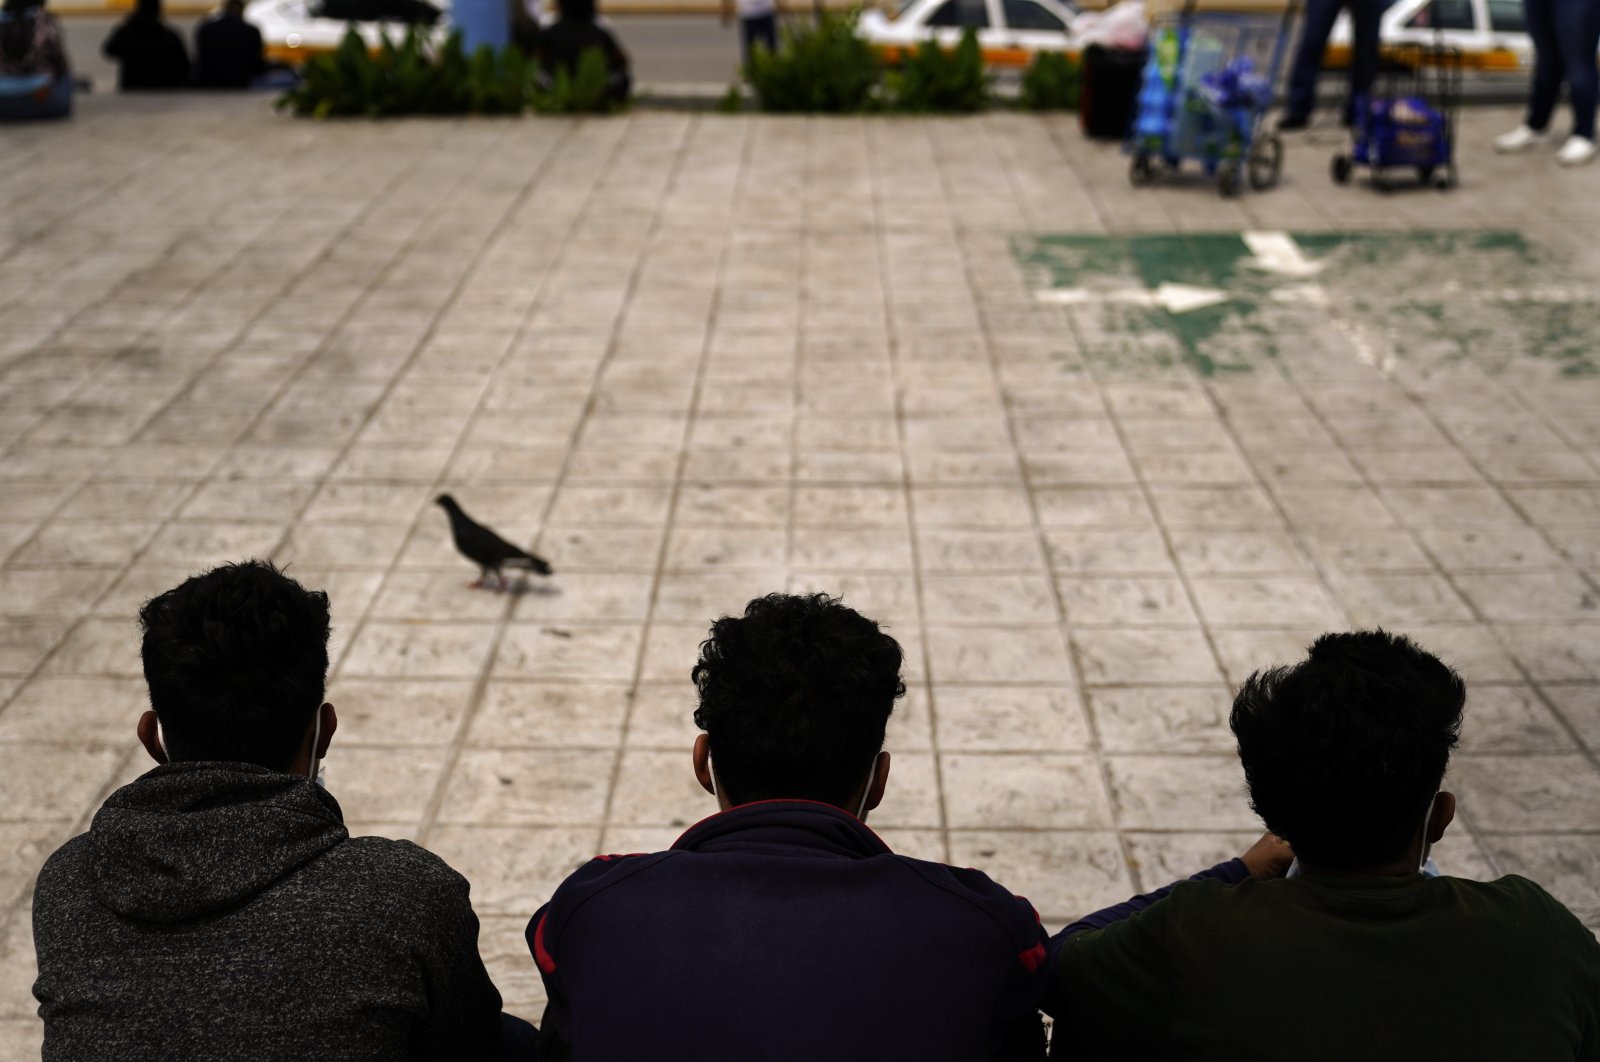 Honduran migrants sit in a plaza at the border after being returned from the U.S. to Mexico, in Reynosa, Mexico, May 13, 2021. (AP Photo)